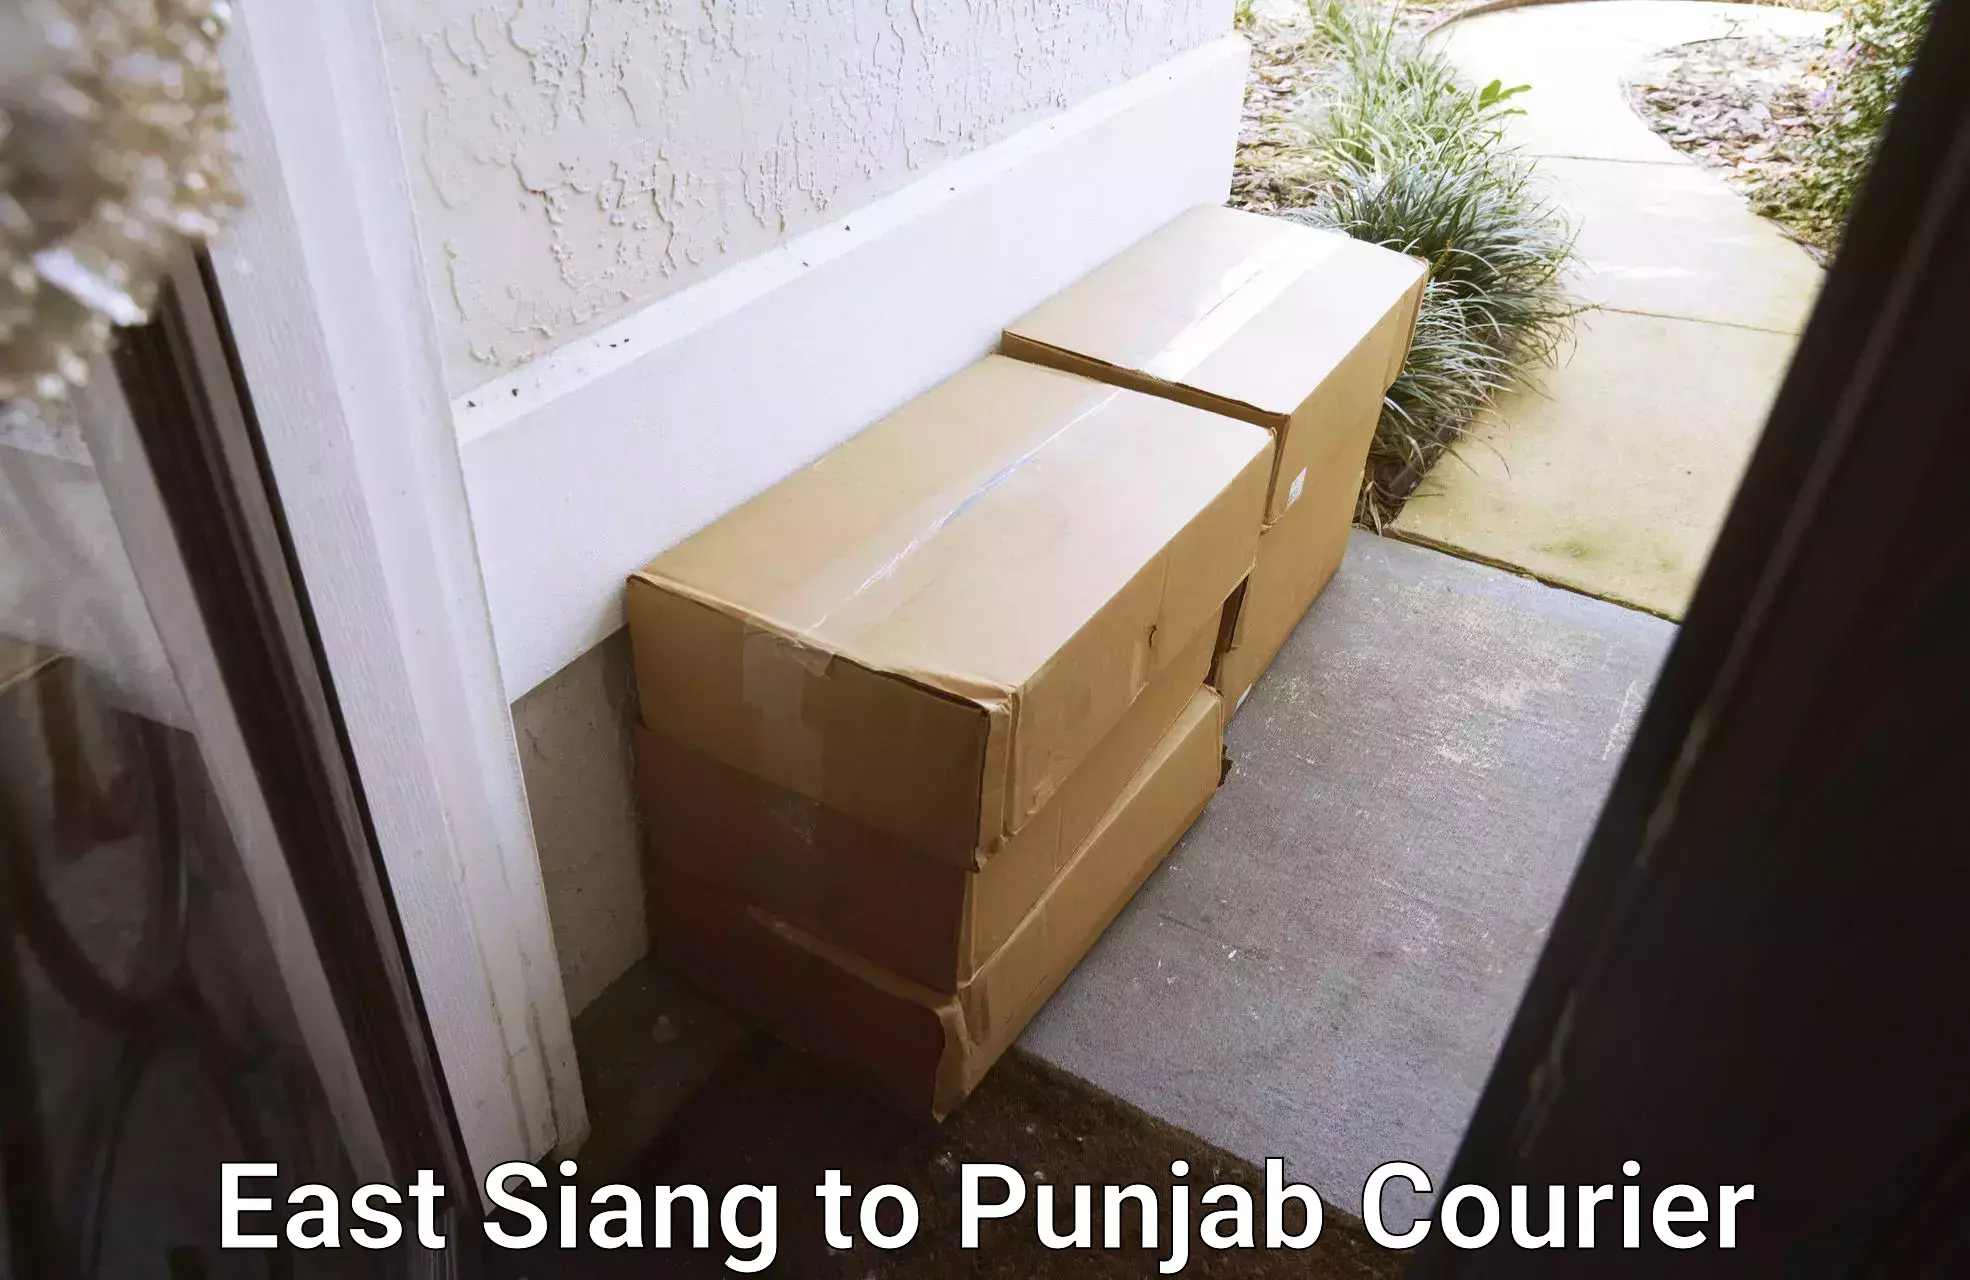 Nationwide parcel services East Siang to Punjab